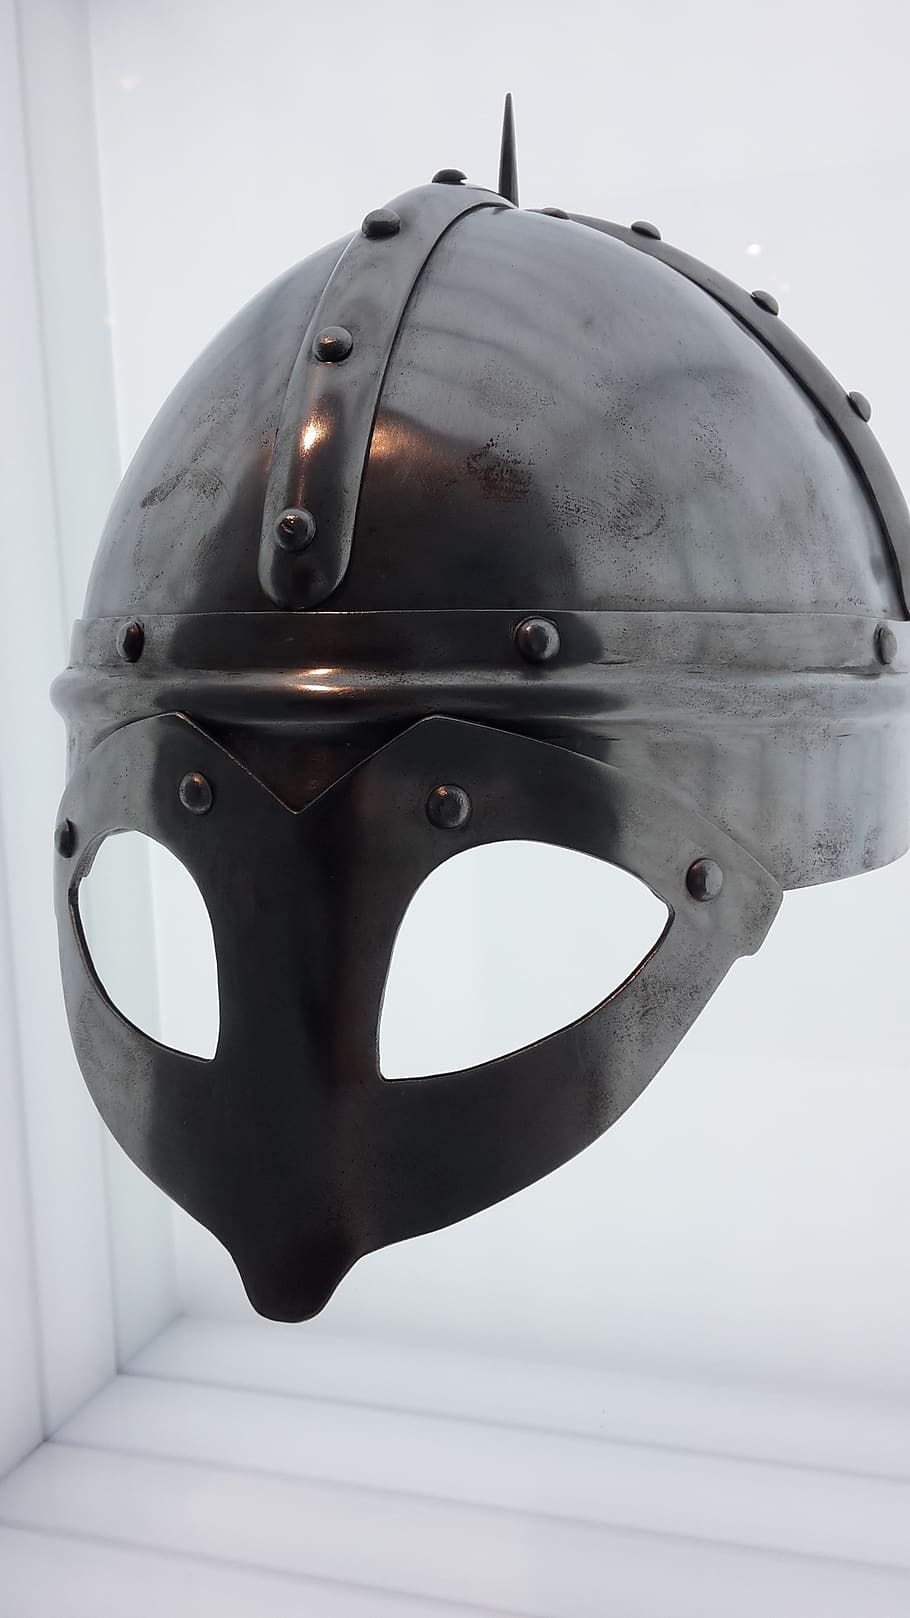 viking, helm, knight, armor, close-up, metal, indoors, security, still life, protection